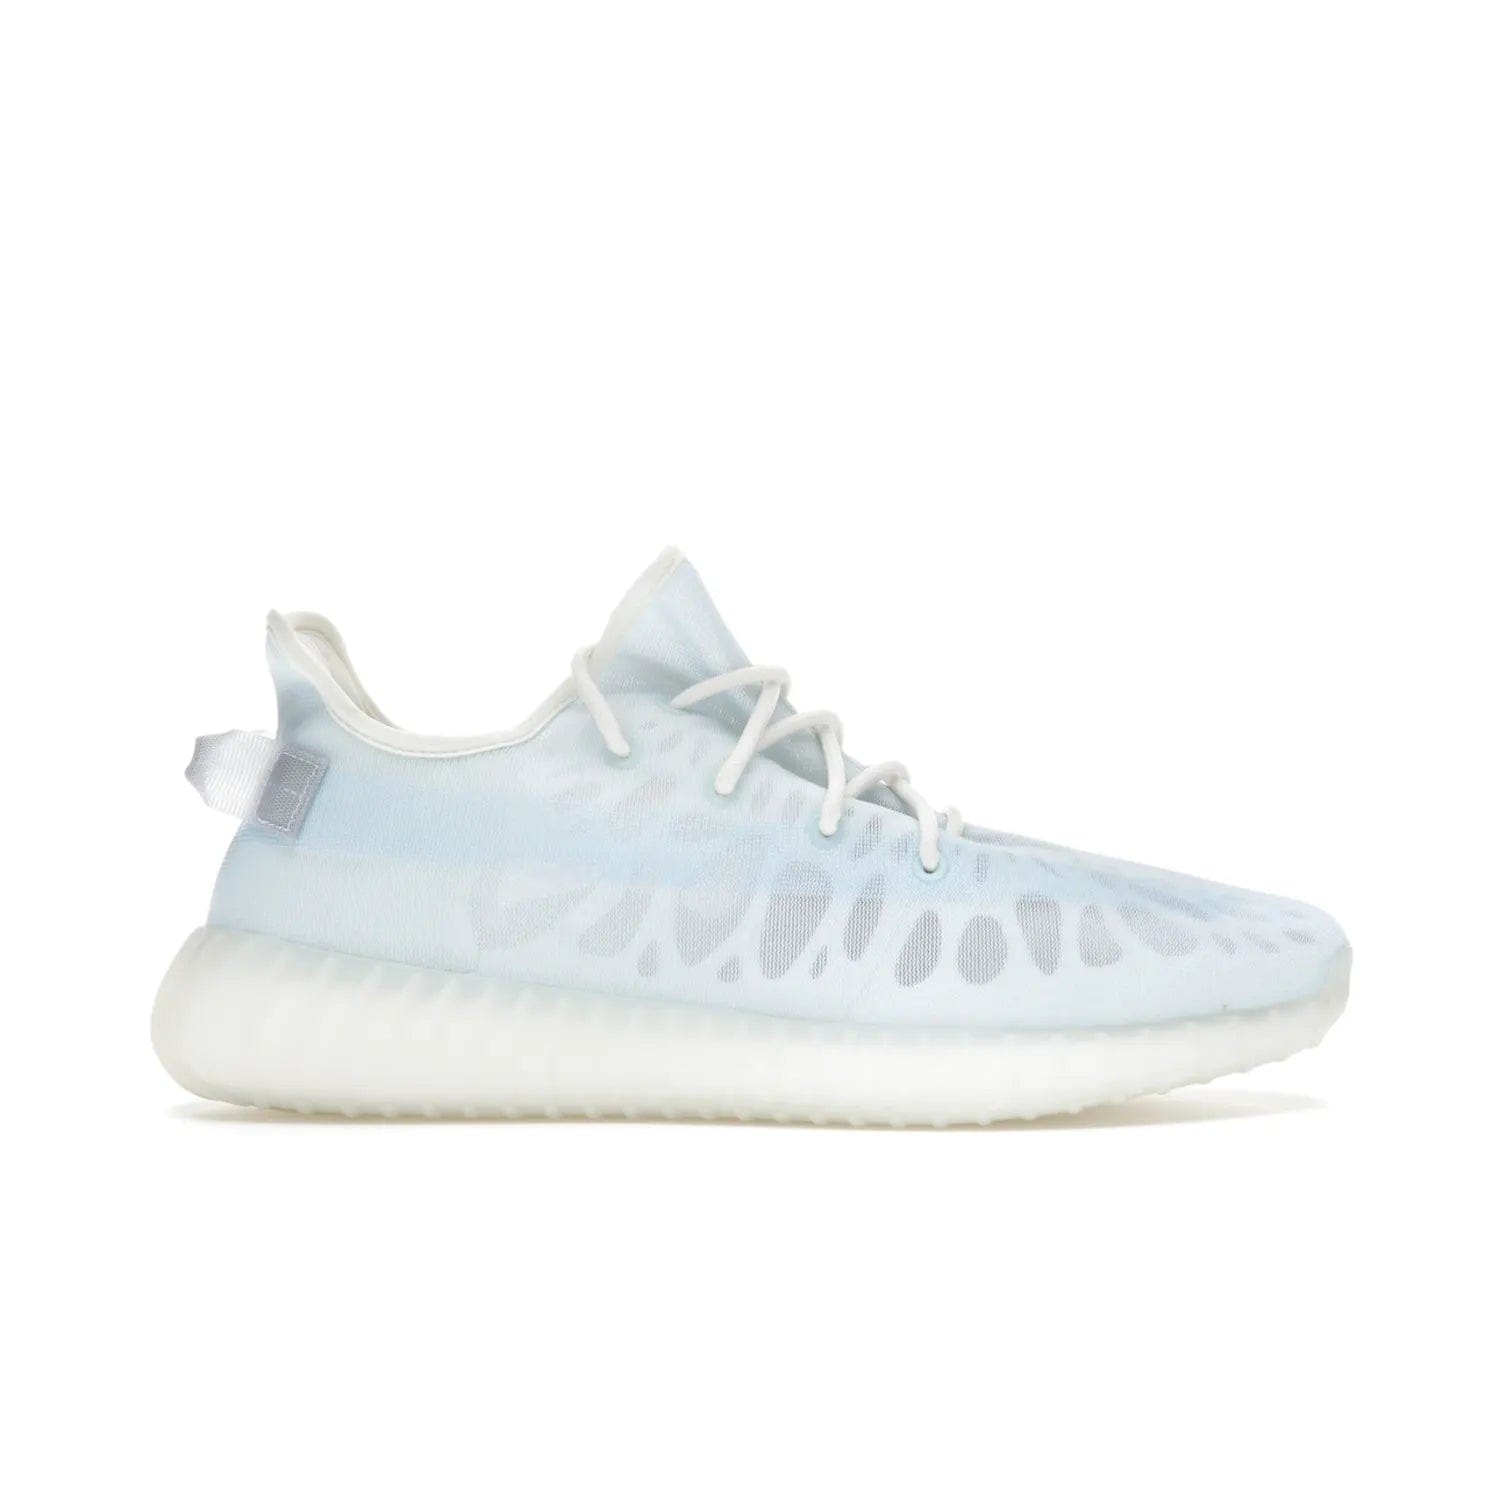 adidas Yeezy Boost 350 V2 Mono Ice - Image 1 - Only at www.BallersClubKickz.com - Introducing the adidas Yeezy 350 V2 Mono Ice - a sleek monofilament mesh design in Ice blue with Boost sole and heel pull tab. Released exclusively in the US for $220.